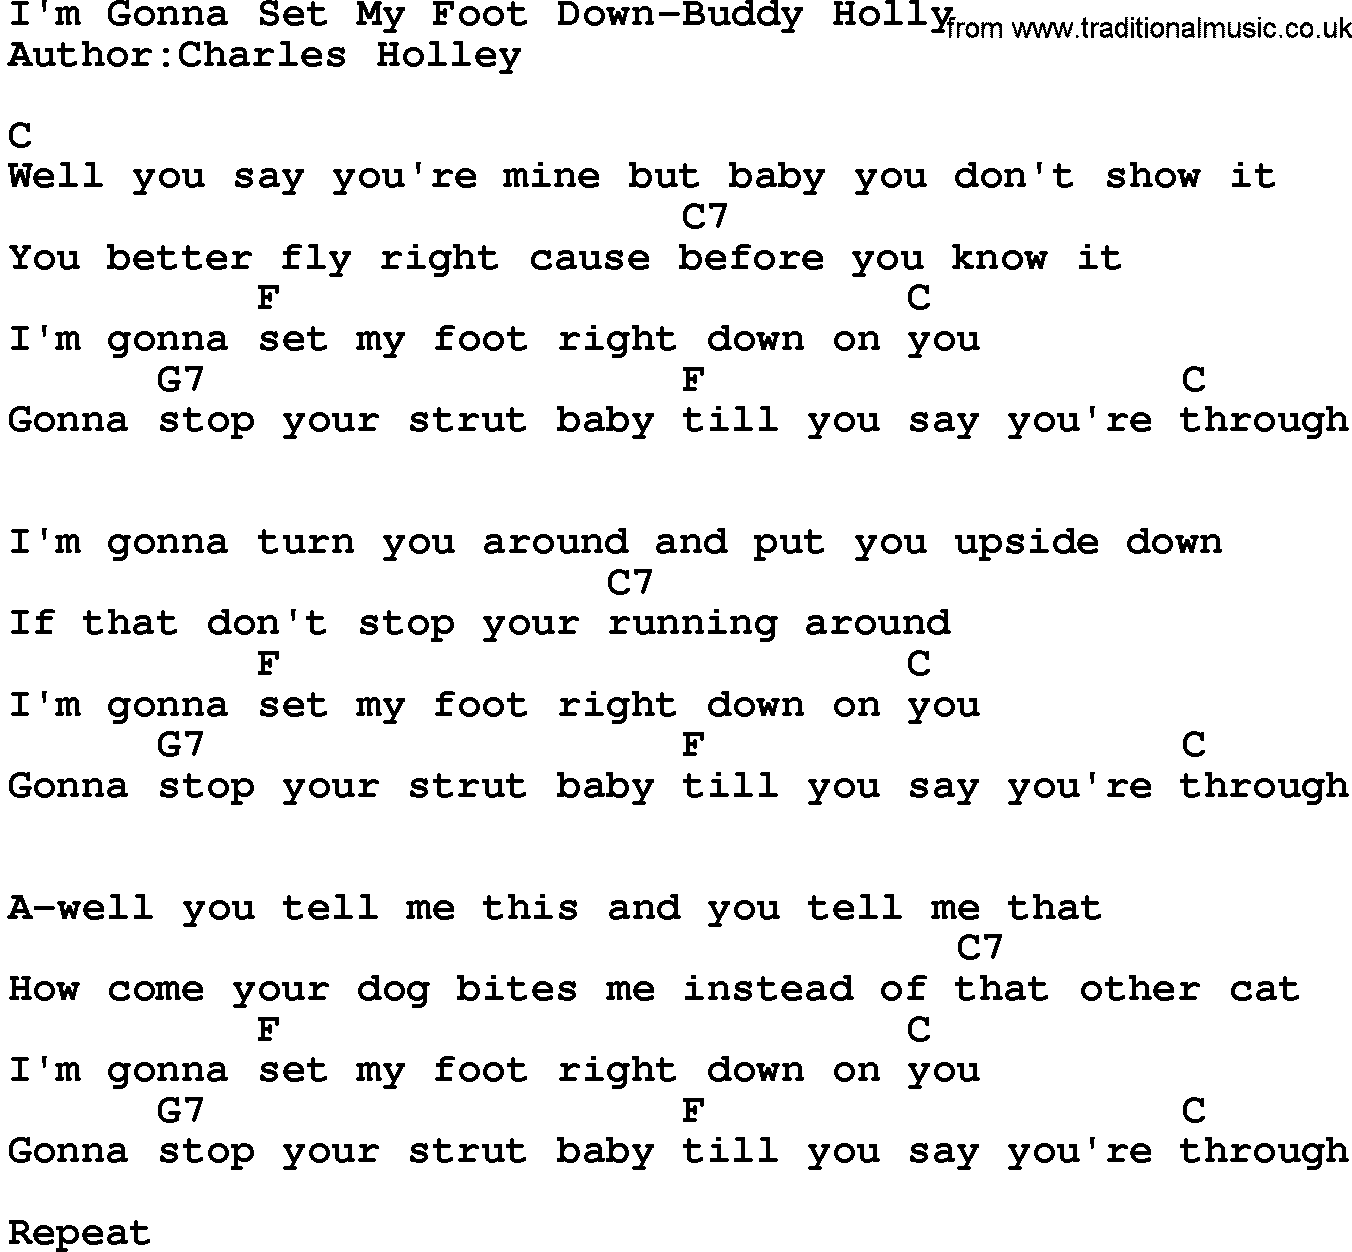 Country music song: I'm Gonna Set My Foot Down-Buddy Holly lyrics and chords